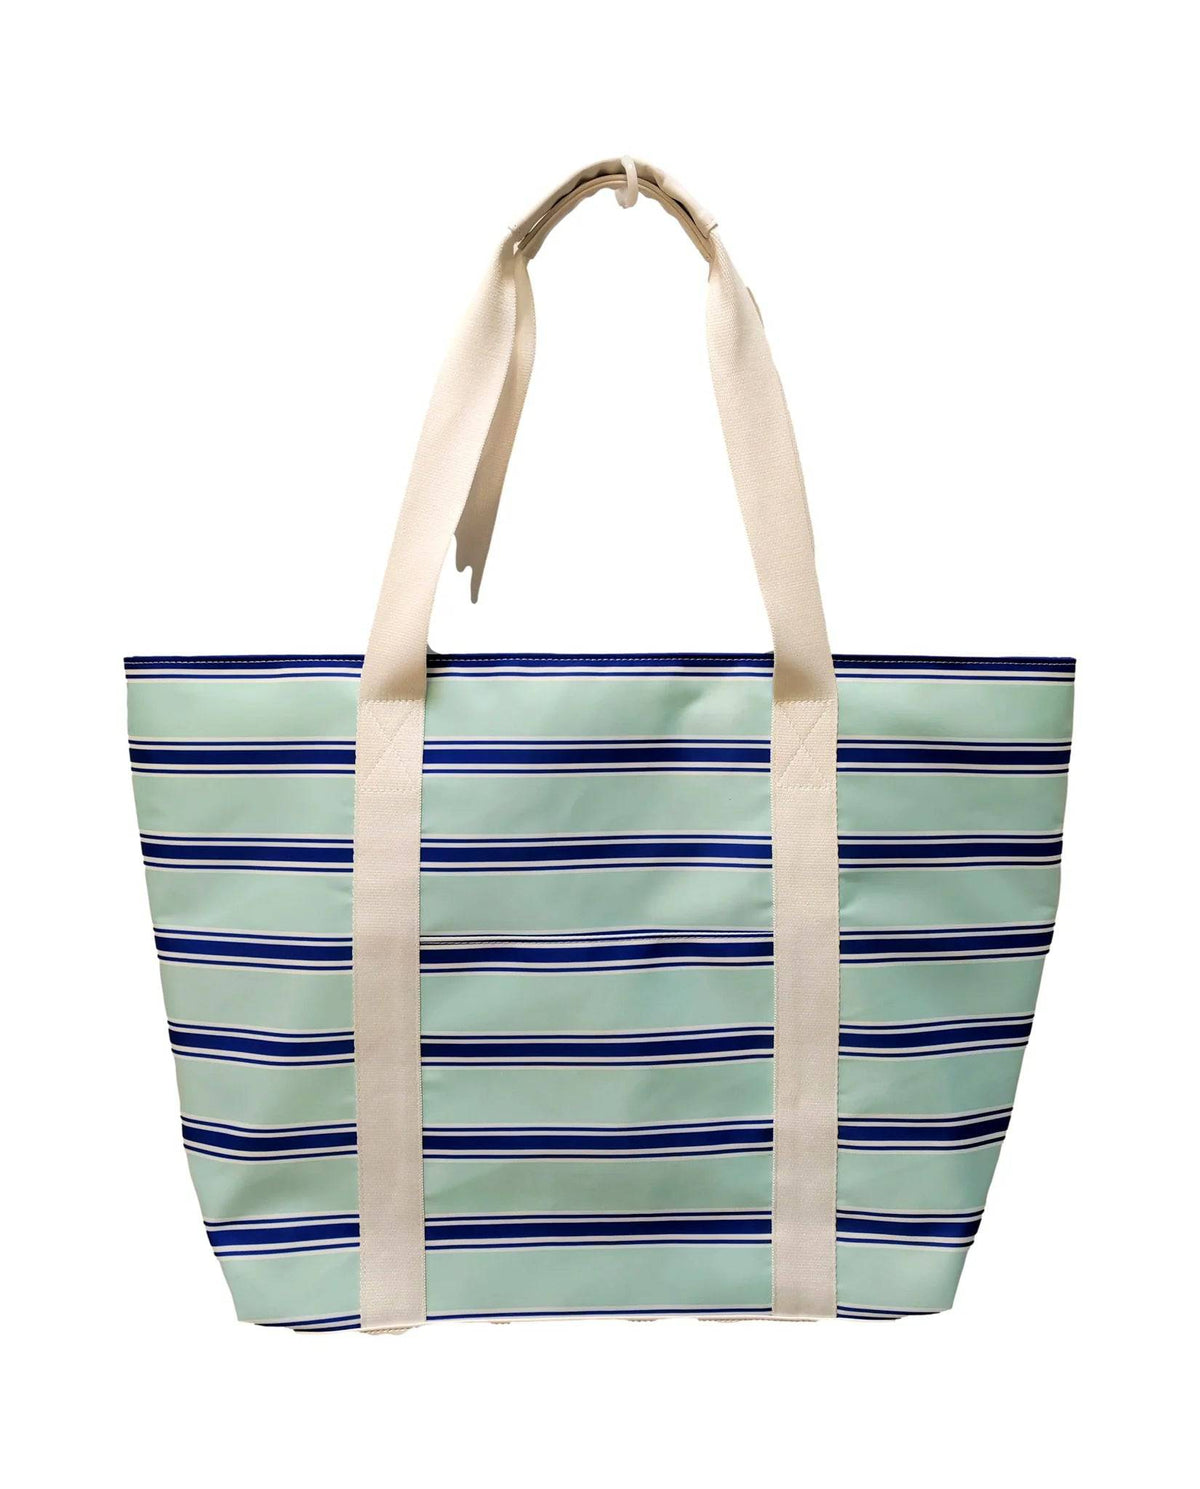 Cabana Tote - Tidal Stripe - 2 colors available - The Preppy Bunny